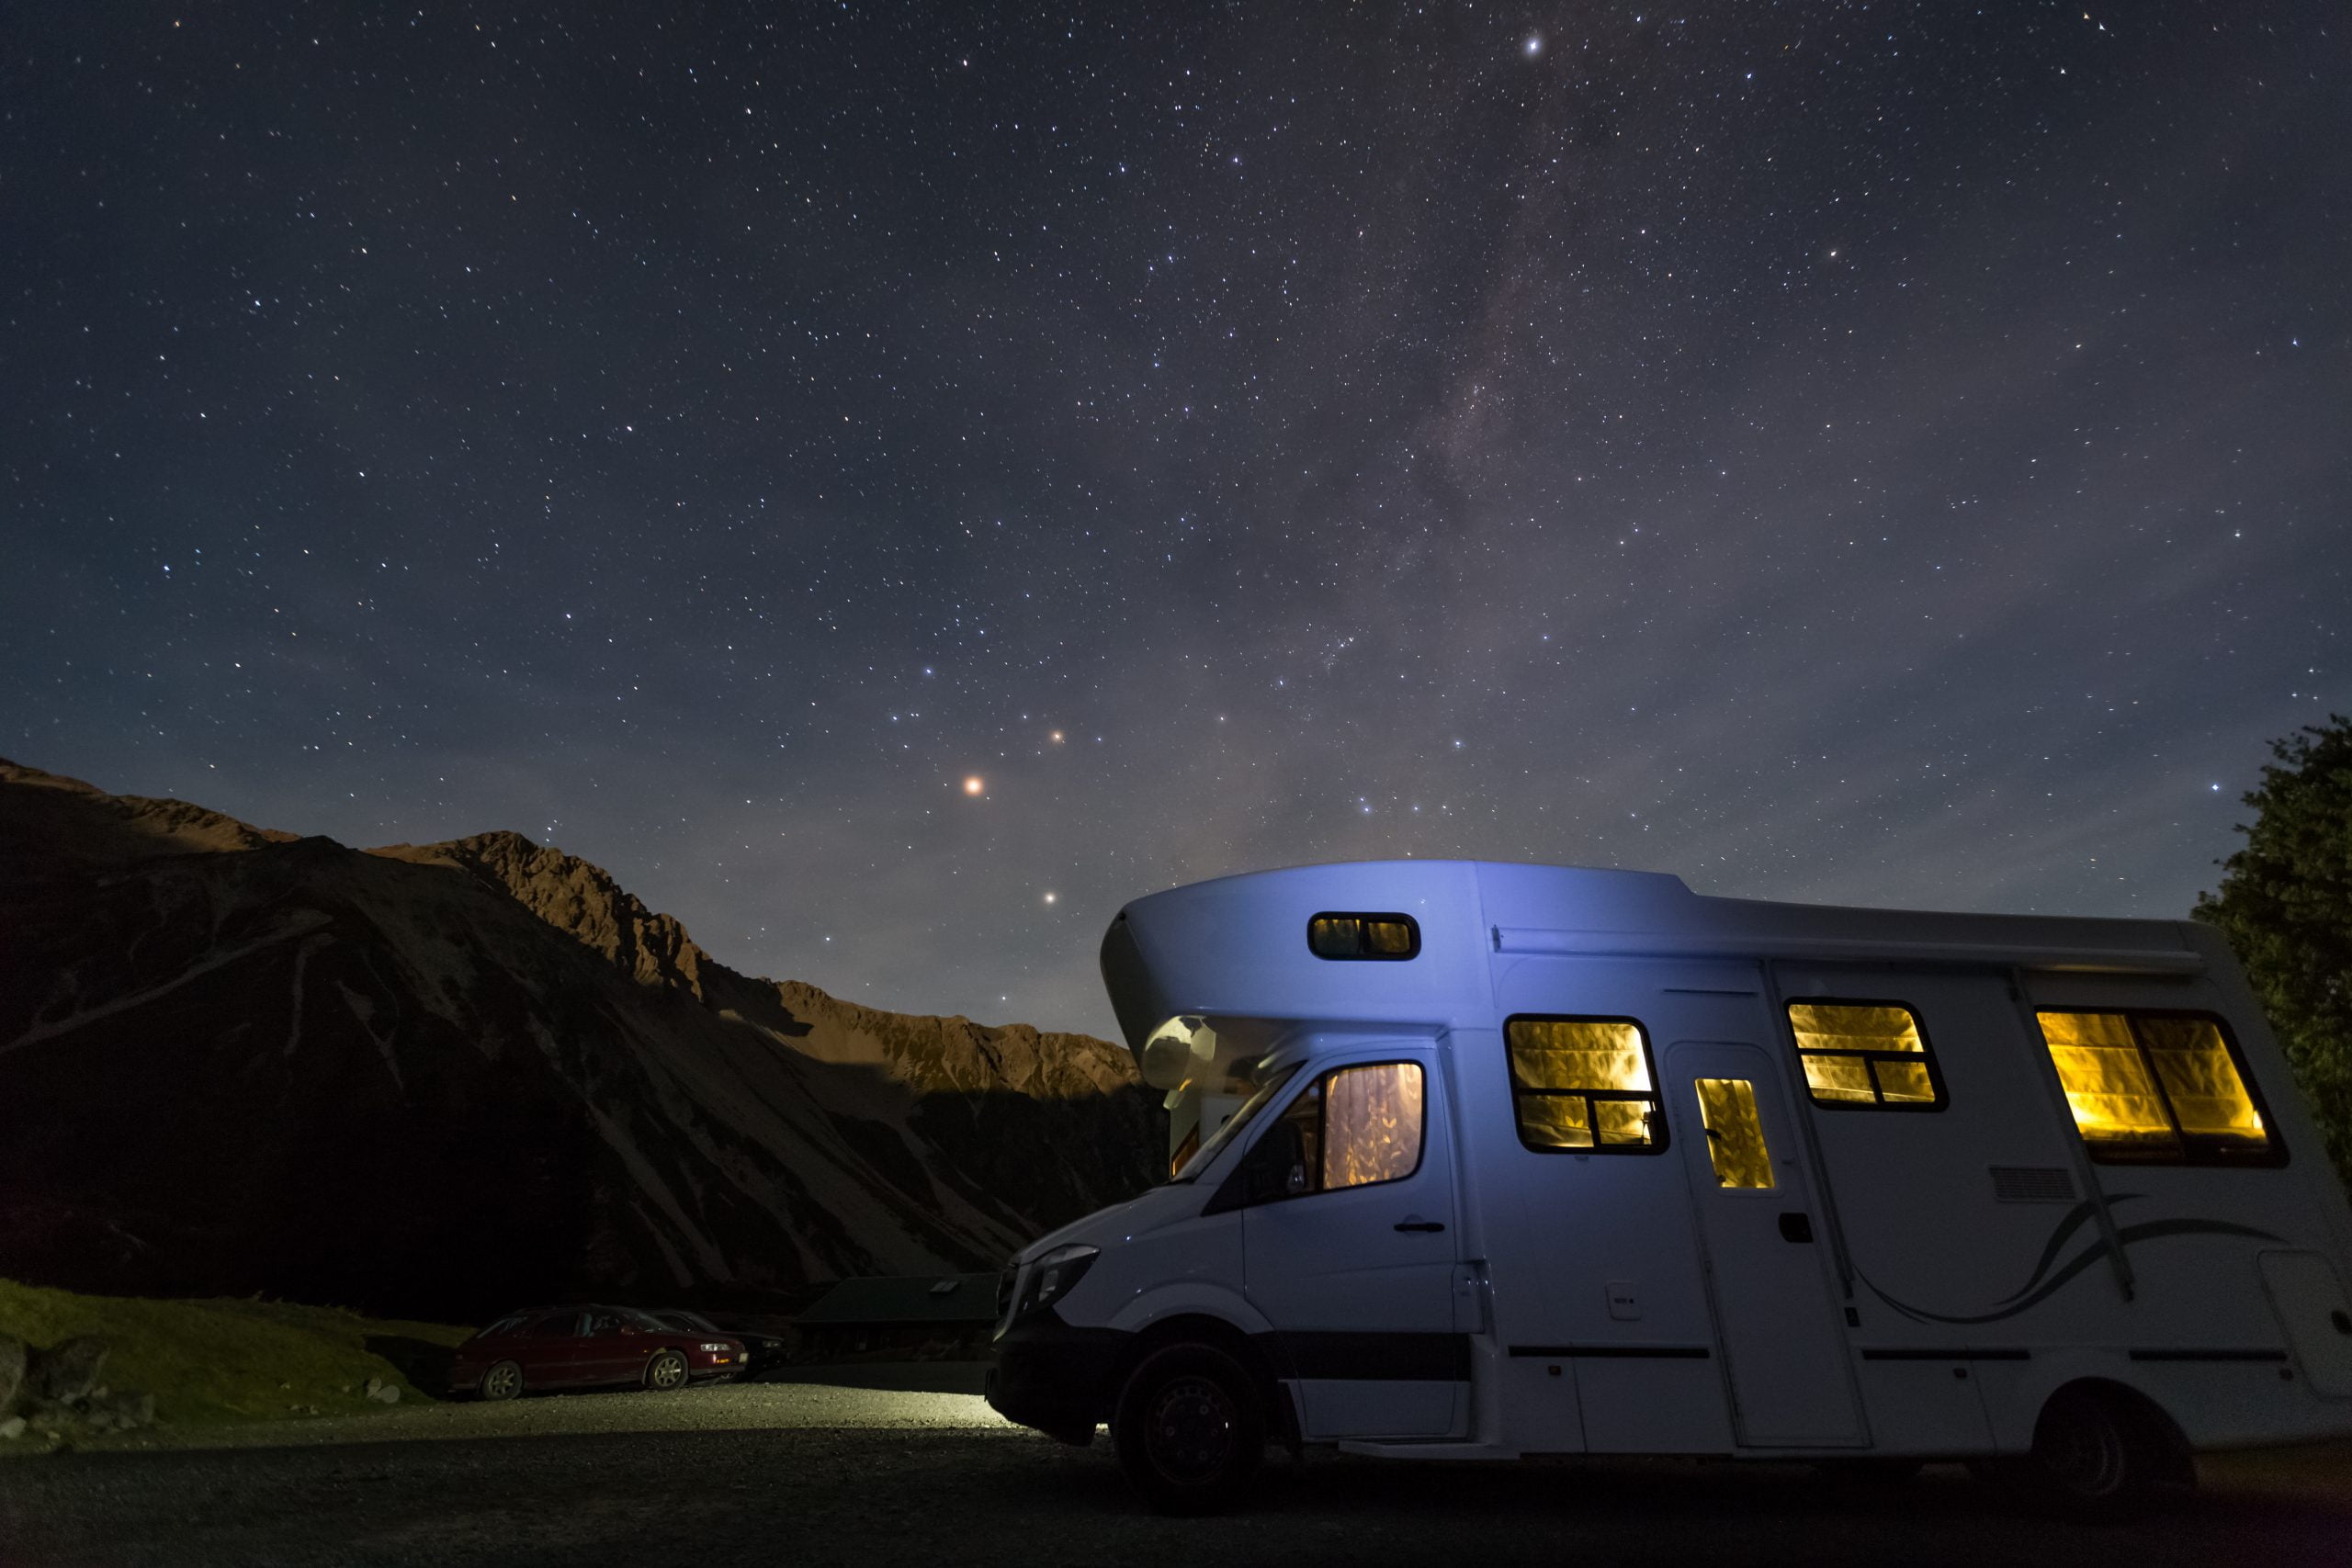 campervan at White Horse campground with night sky background